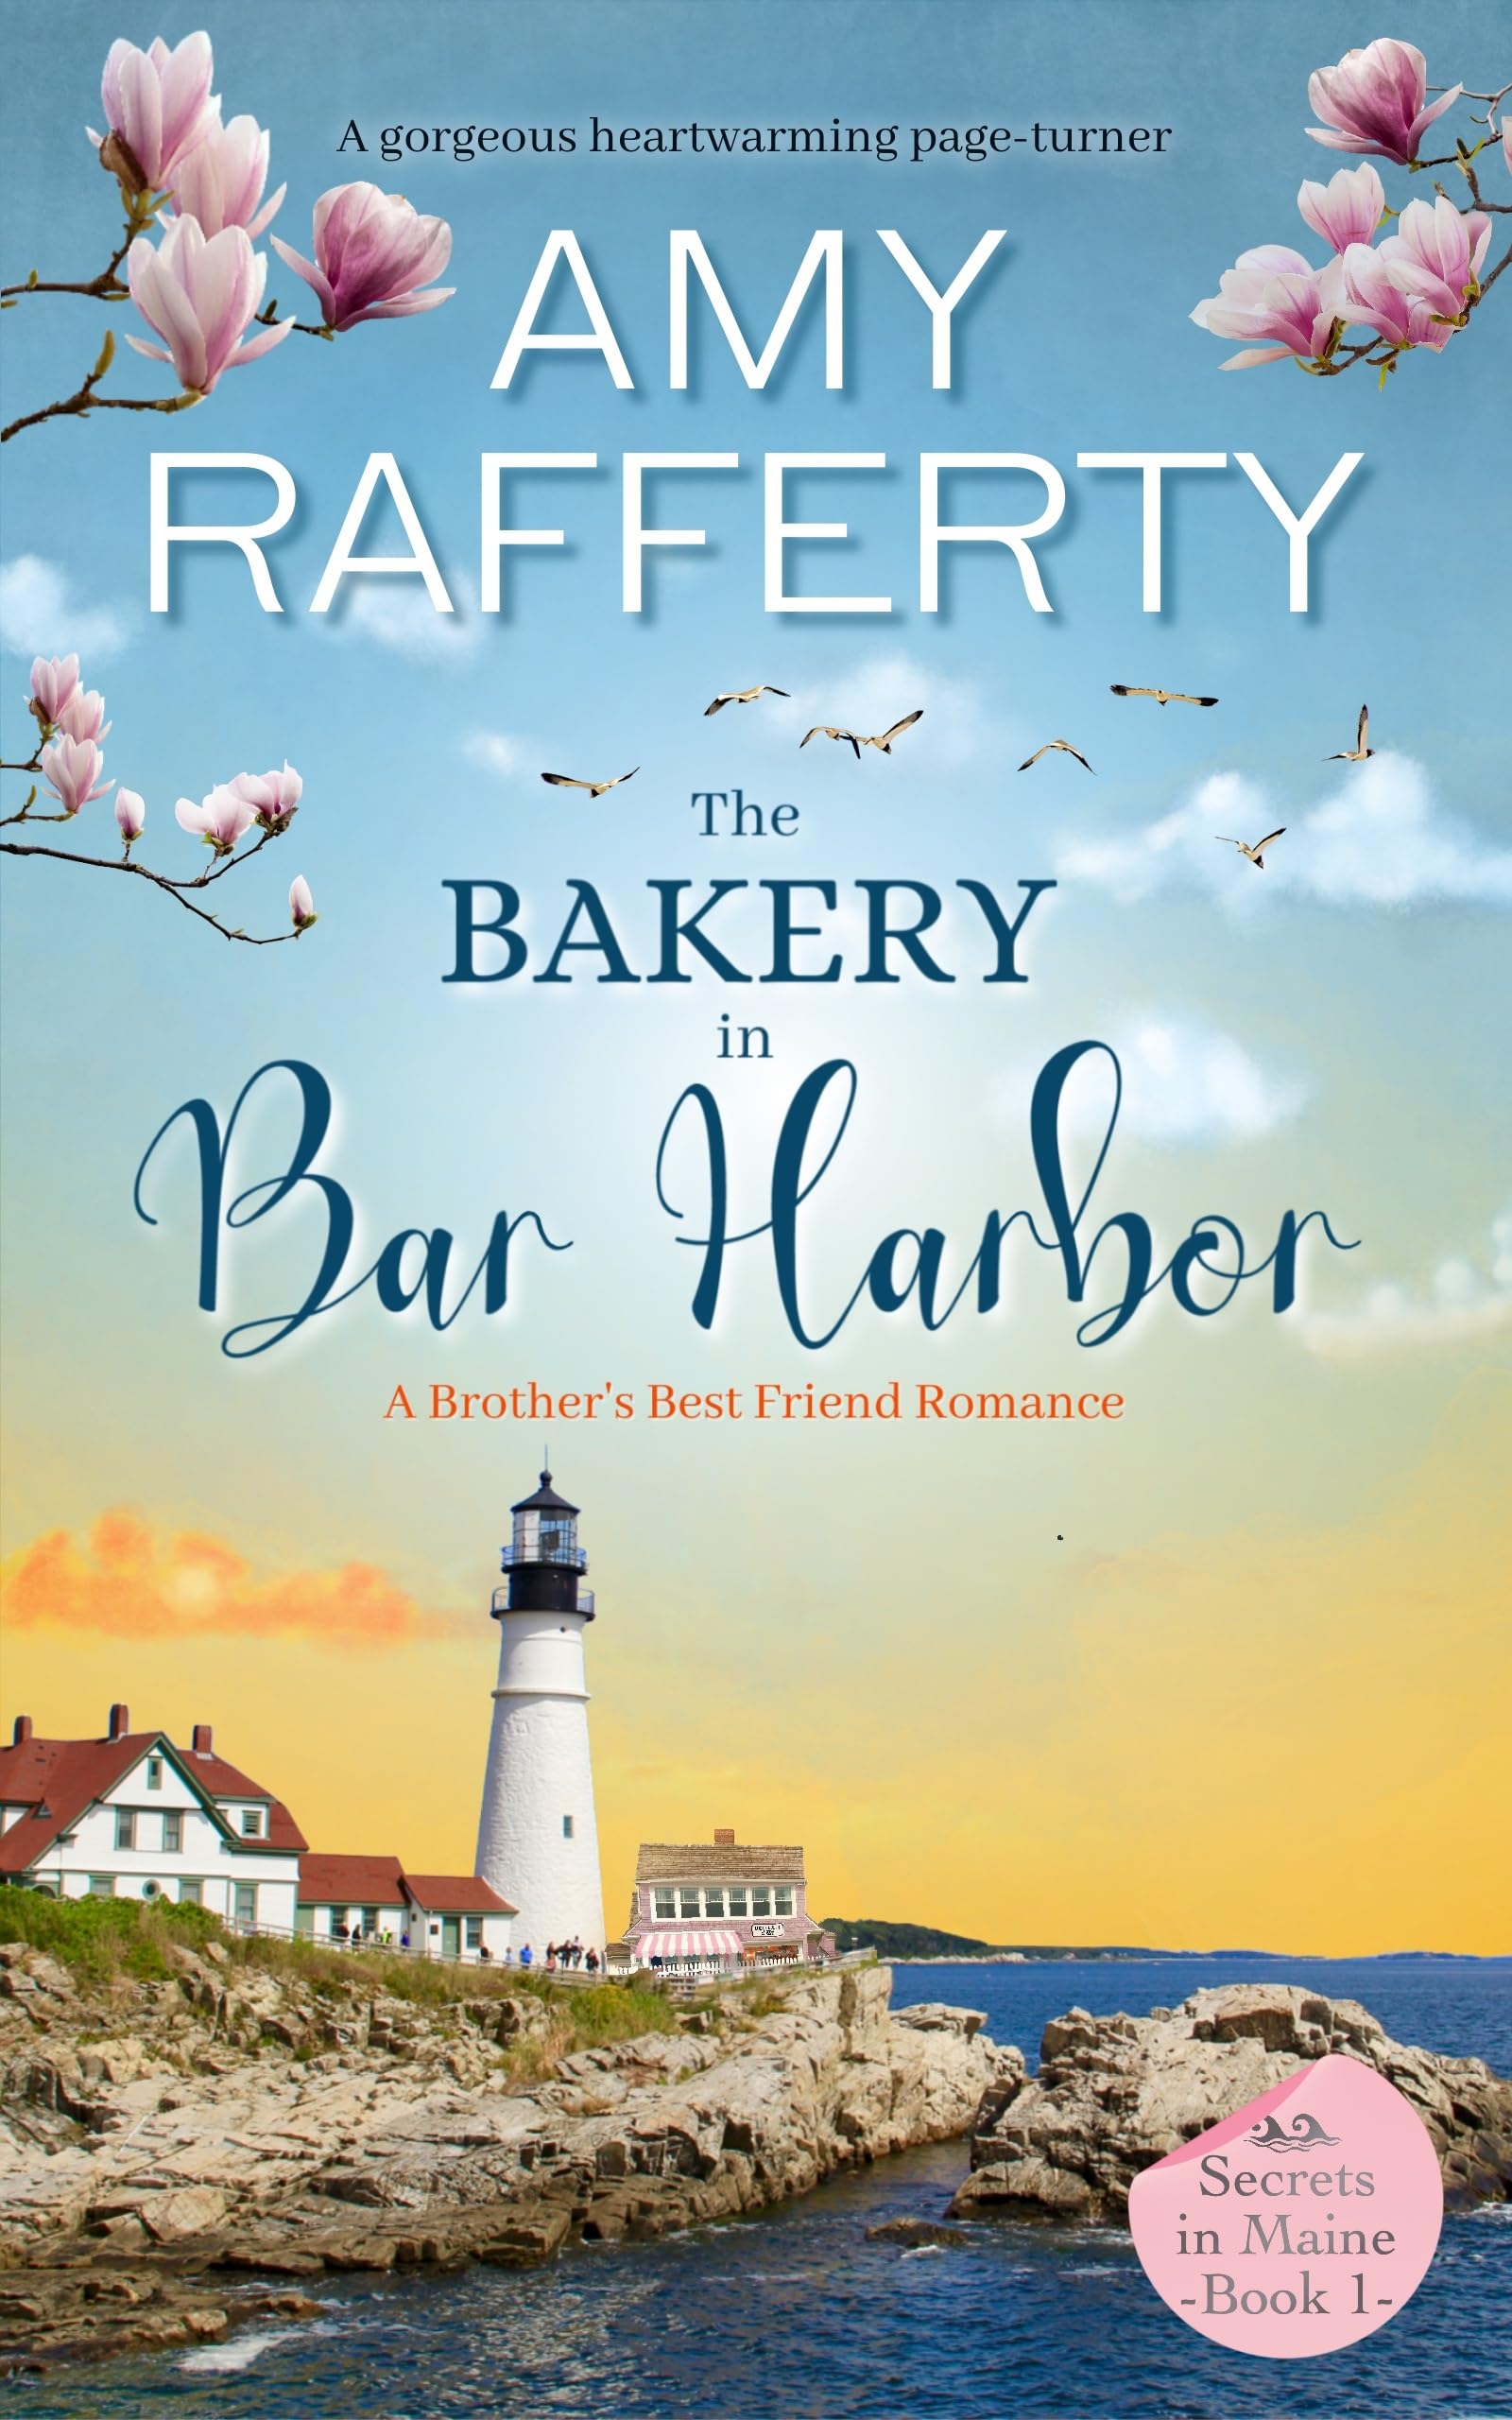 The Bakery In Bar Harbor: A Brother's Best Friend Romance (Secrets In Maine Book 1)